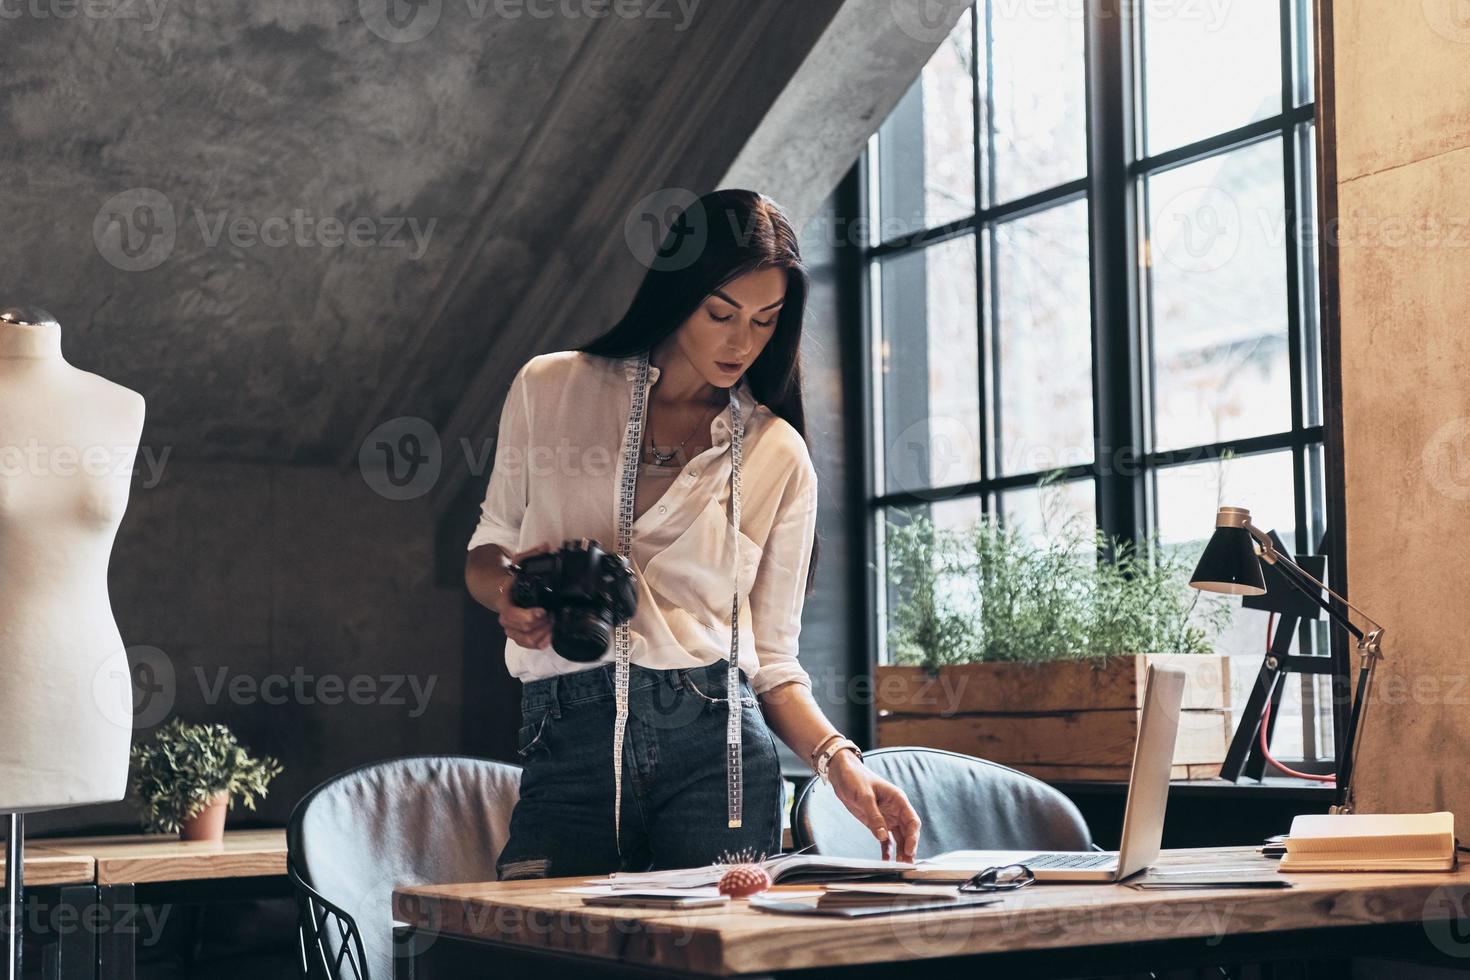 Developing new fashion line. Concentrated young woman with tape measure on her neck looking at fashion magazine and holding digital camera while standing near the desk in her workshop photo